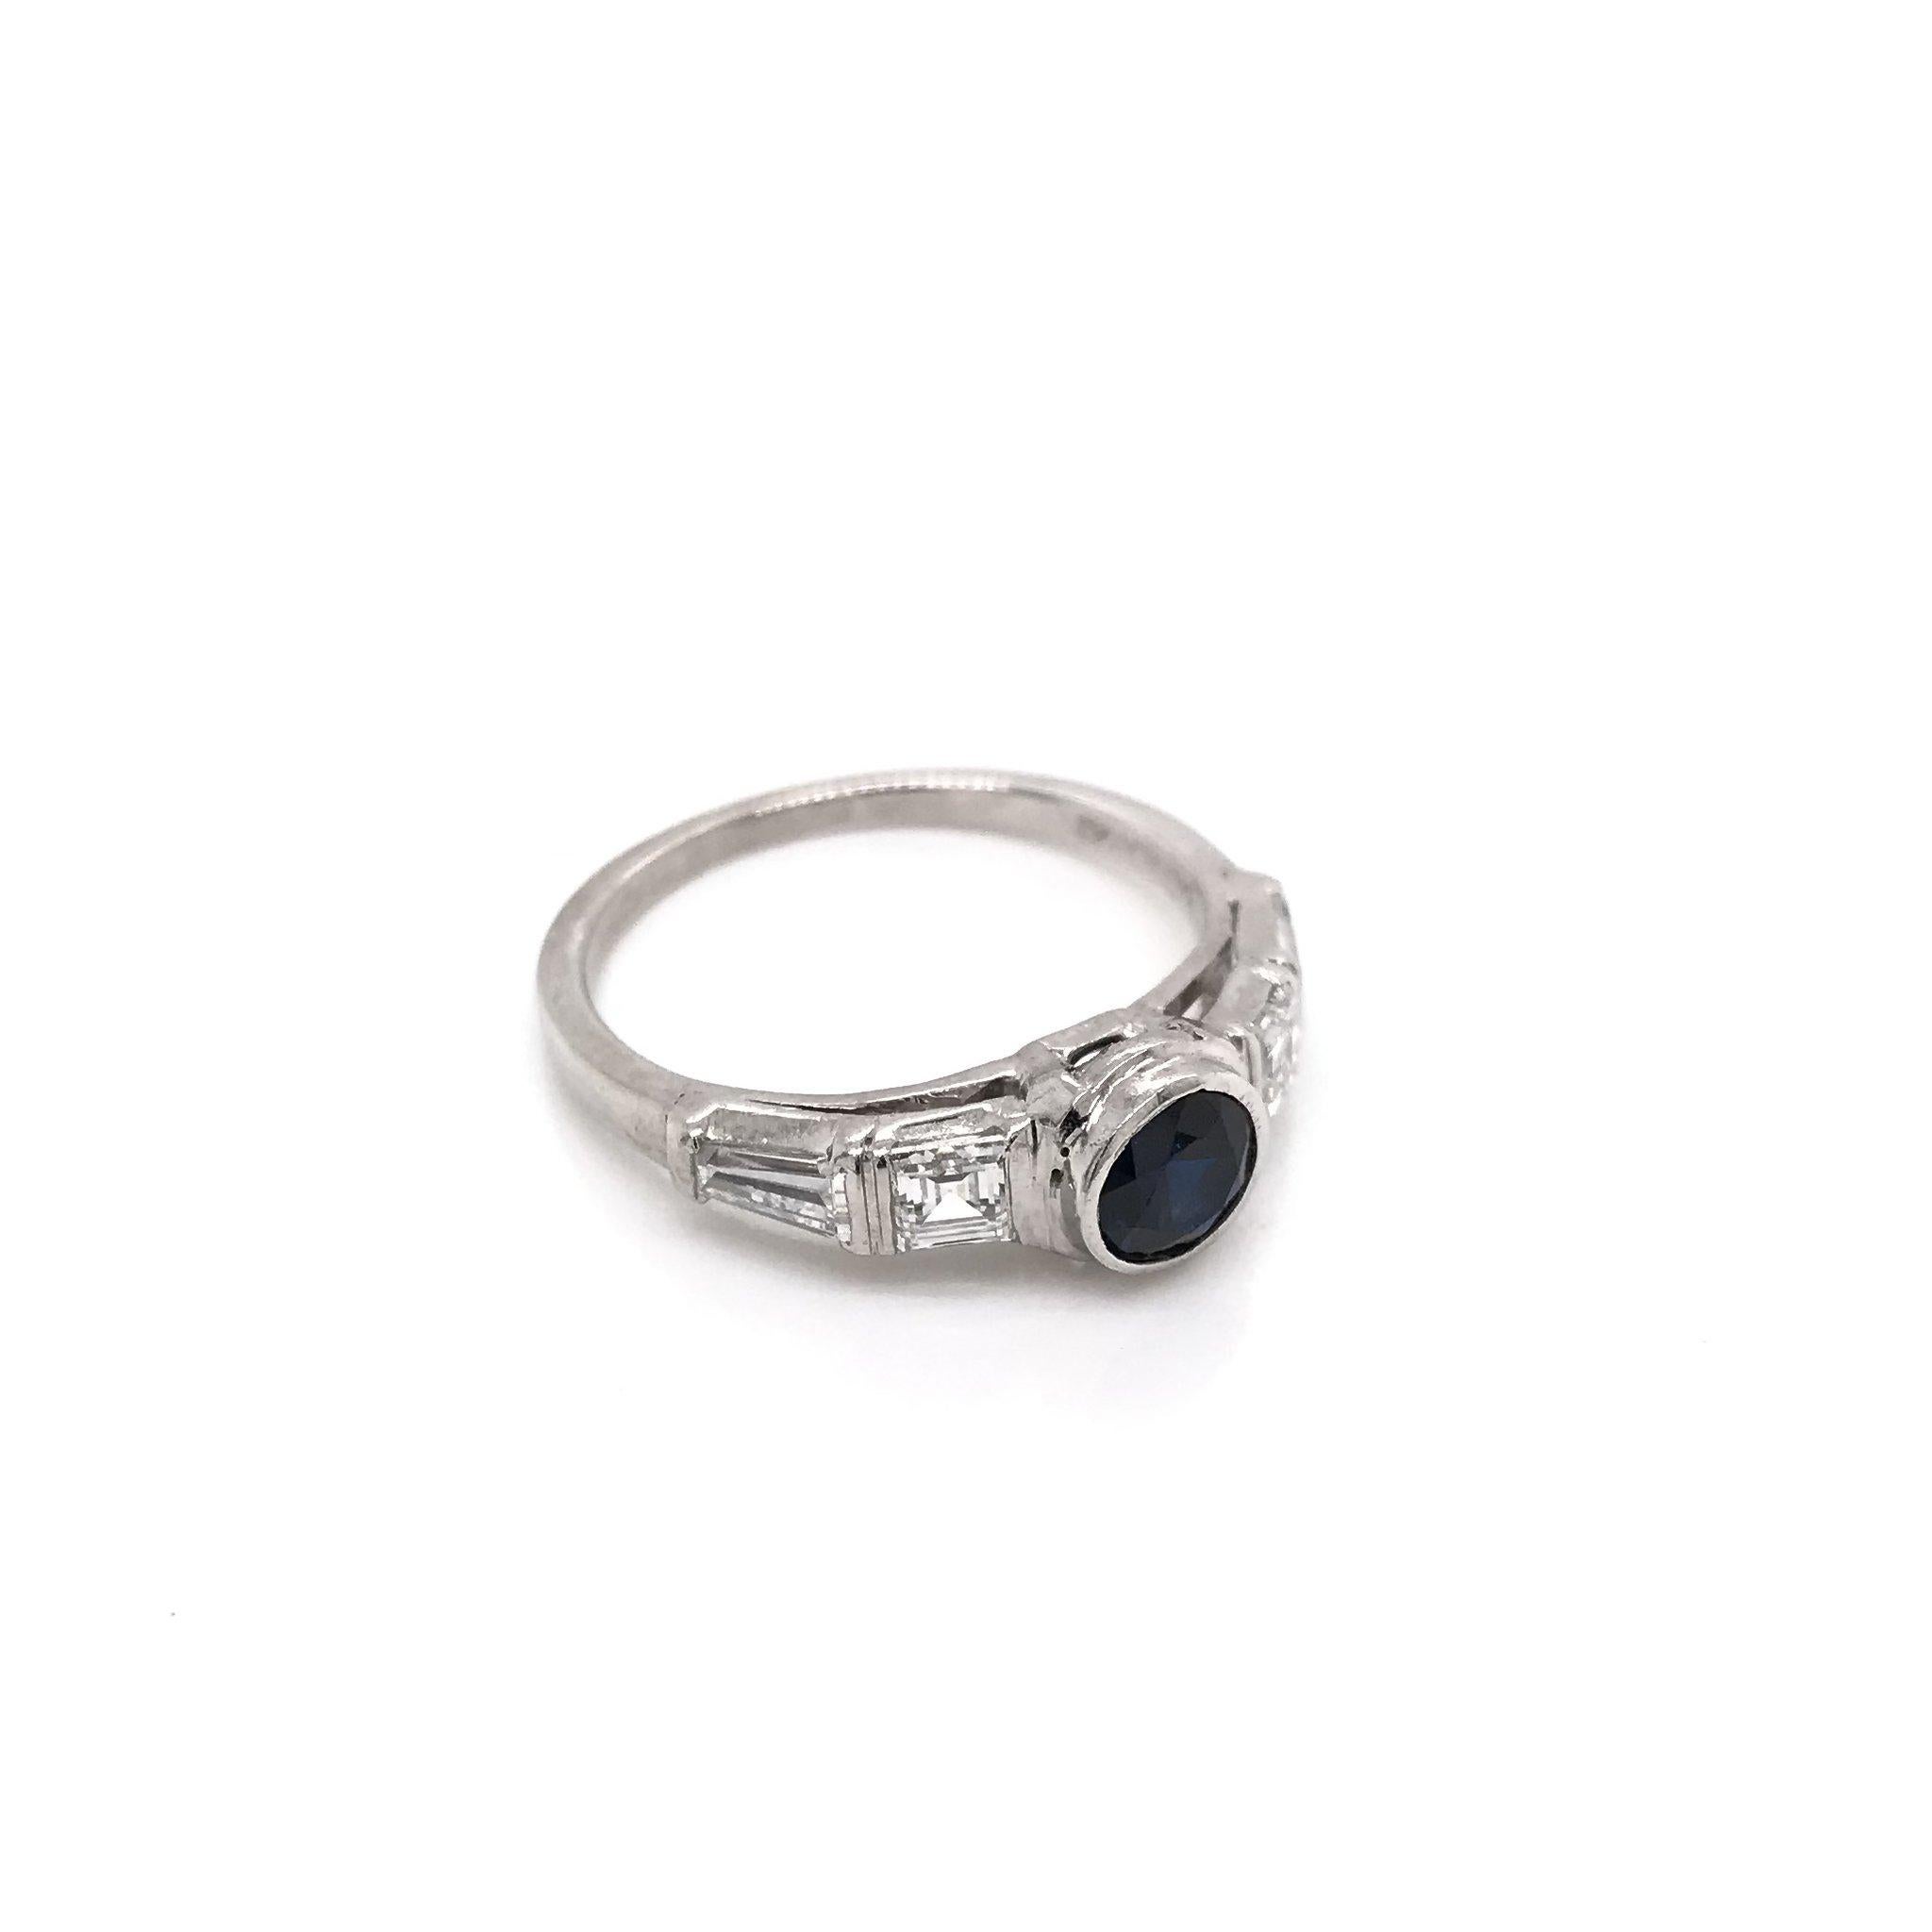 This charming Mid Century piece was crafted sometime during the Retro design period ( 1940-1960 ). The center stone is a darkly hued blue sapphire measuring approximately 0.57 carats. The blue sapphire is bezel set and flanked by two Asscher cut